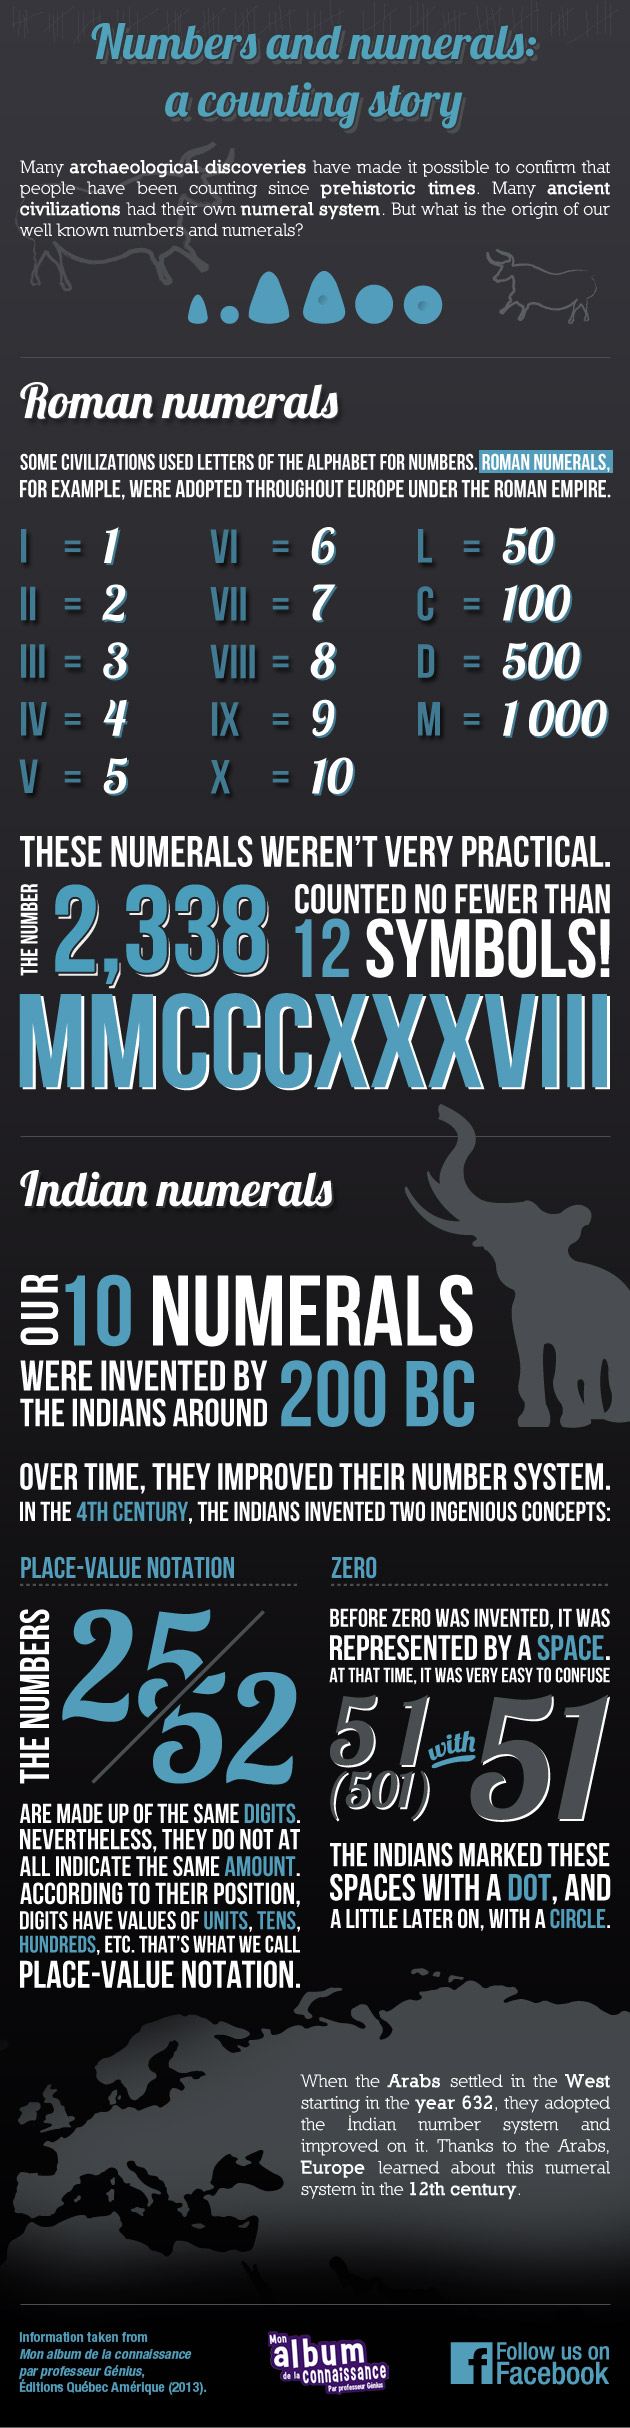 Infographic: Numbers and numerals: a counting story